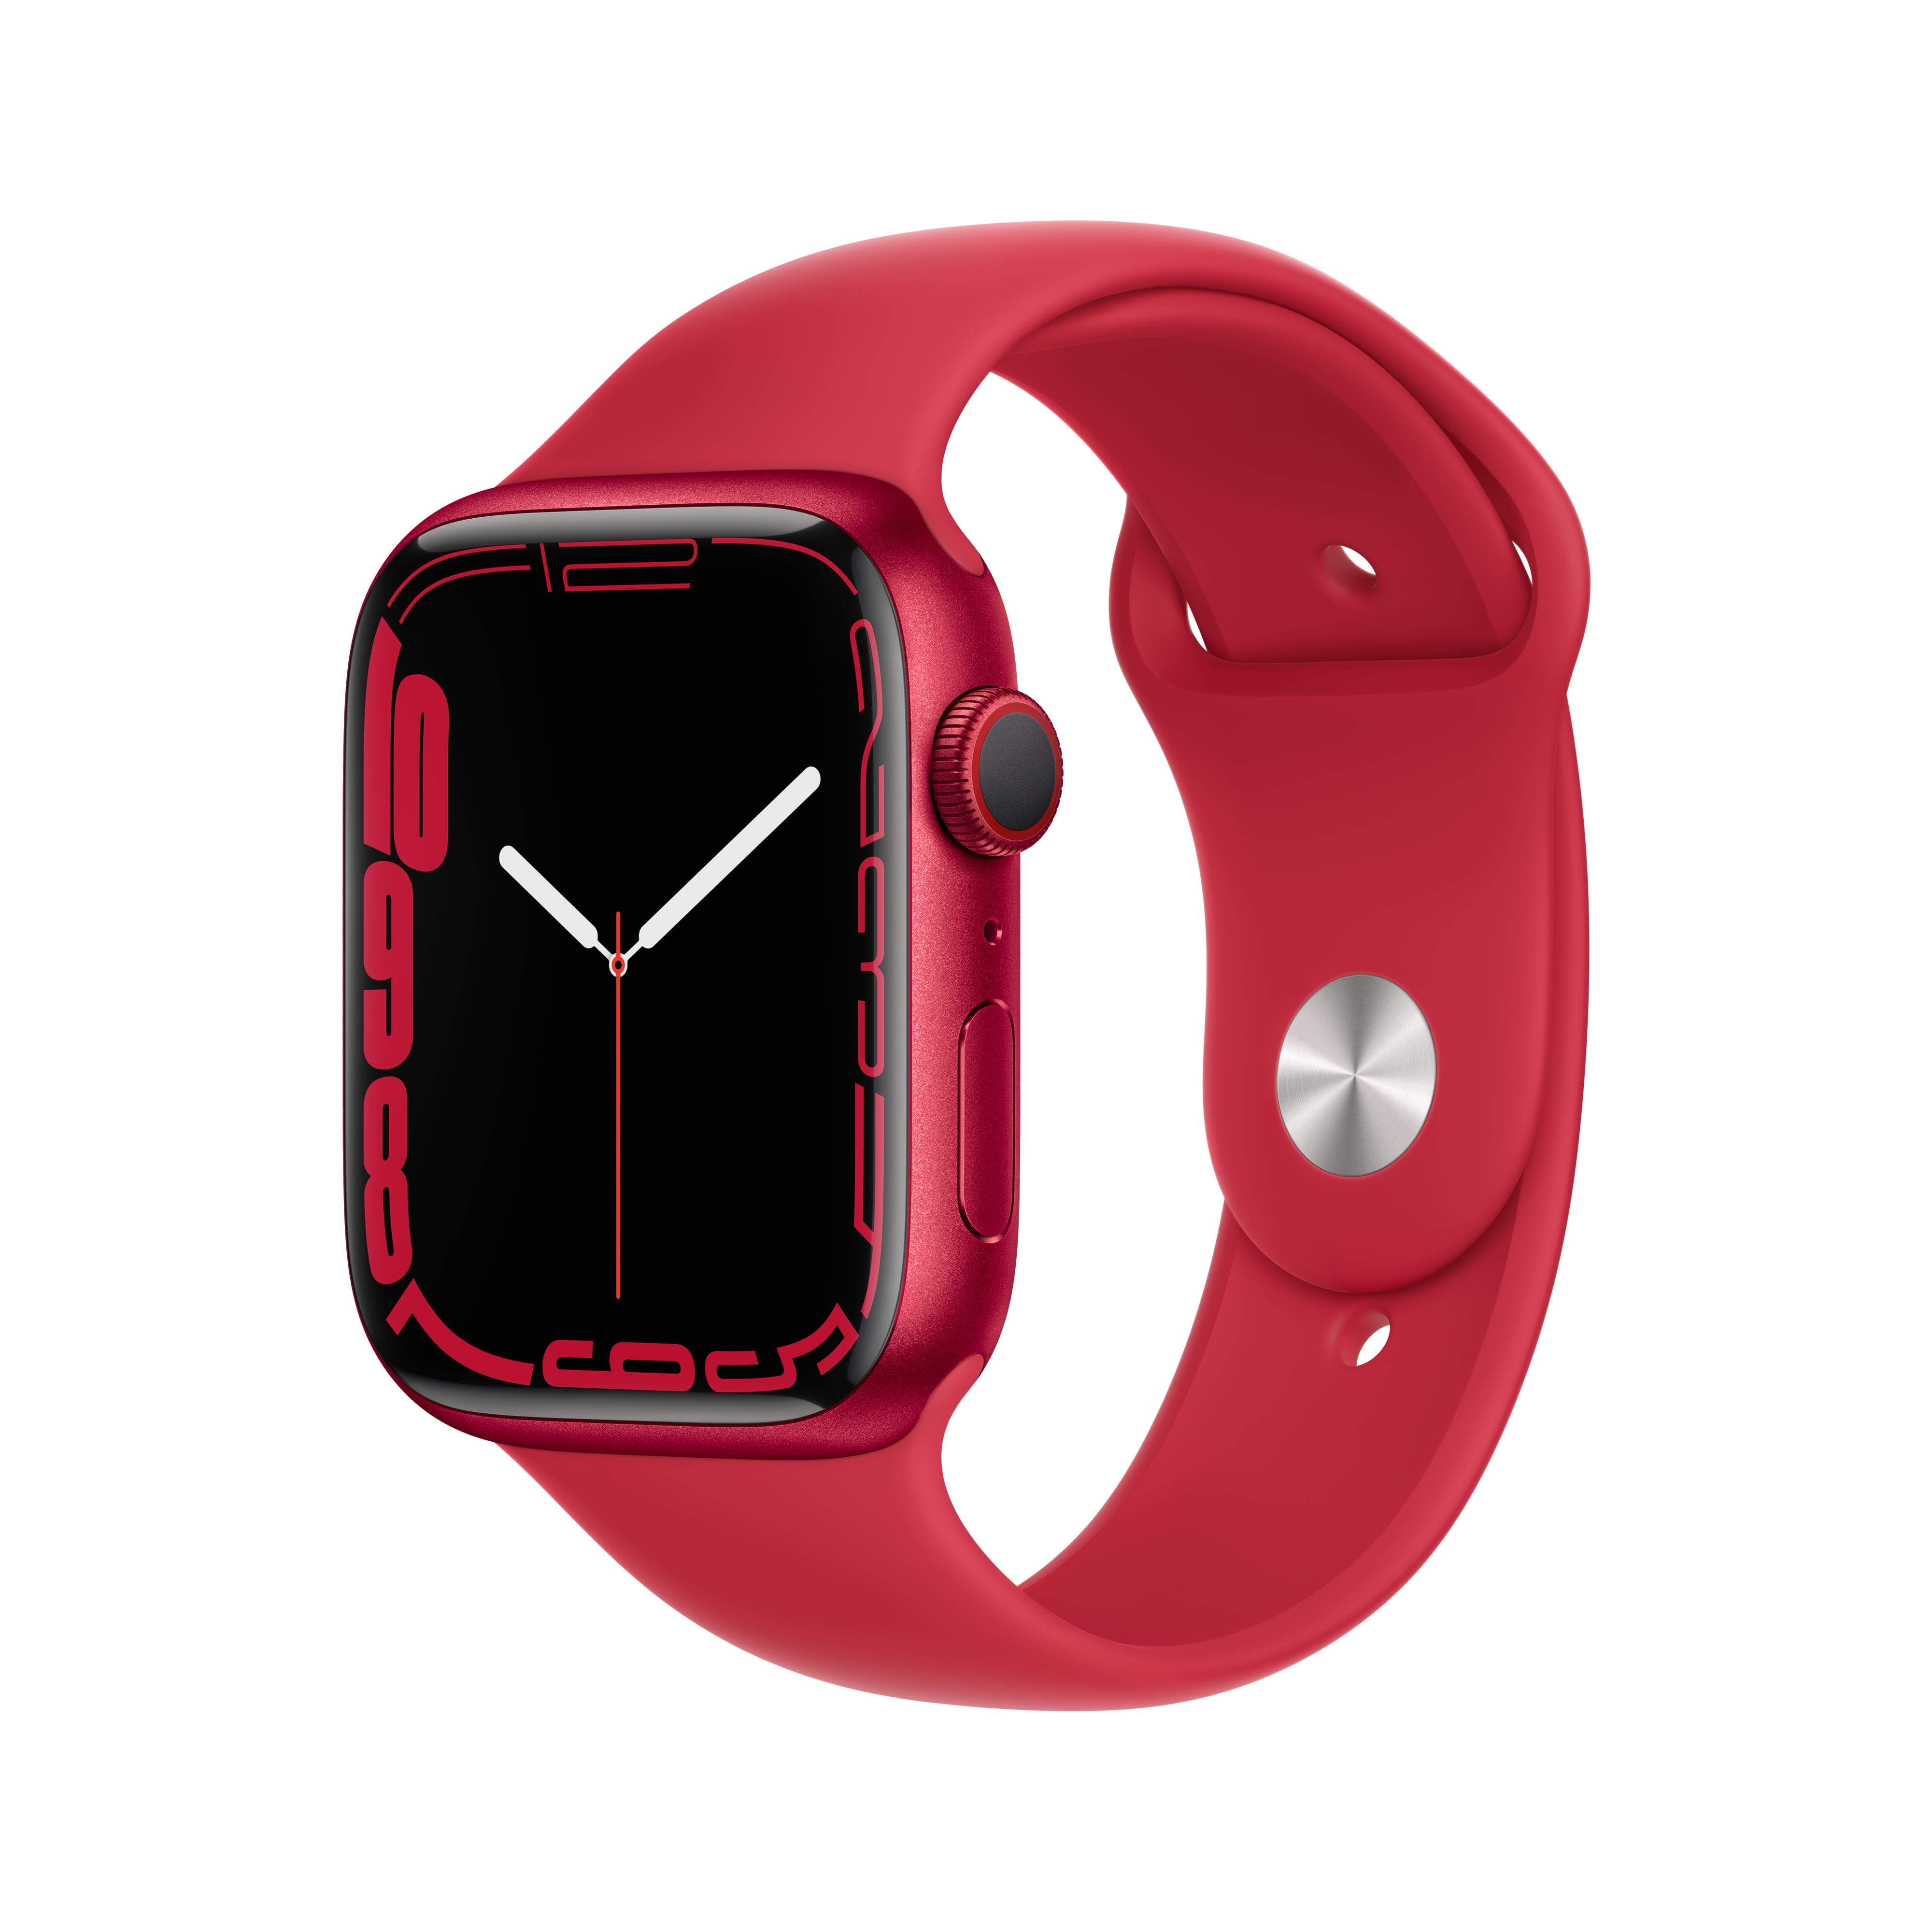 Apple Watch Series 6 GPS, 40mm PRODUCT(RED) Aluminum 